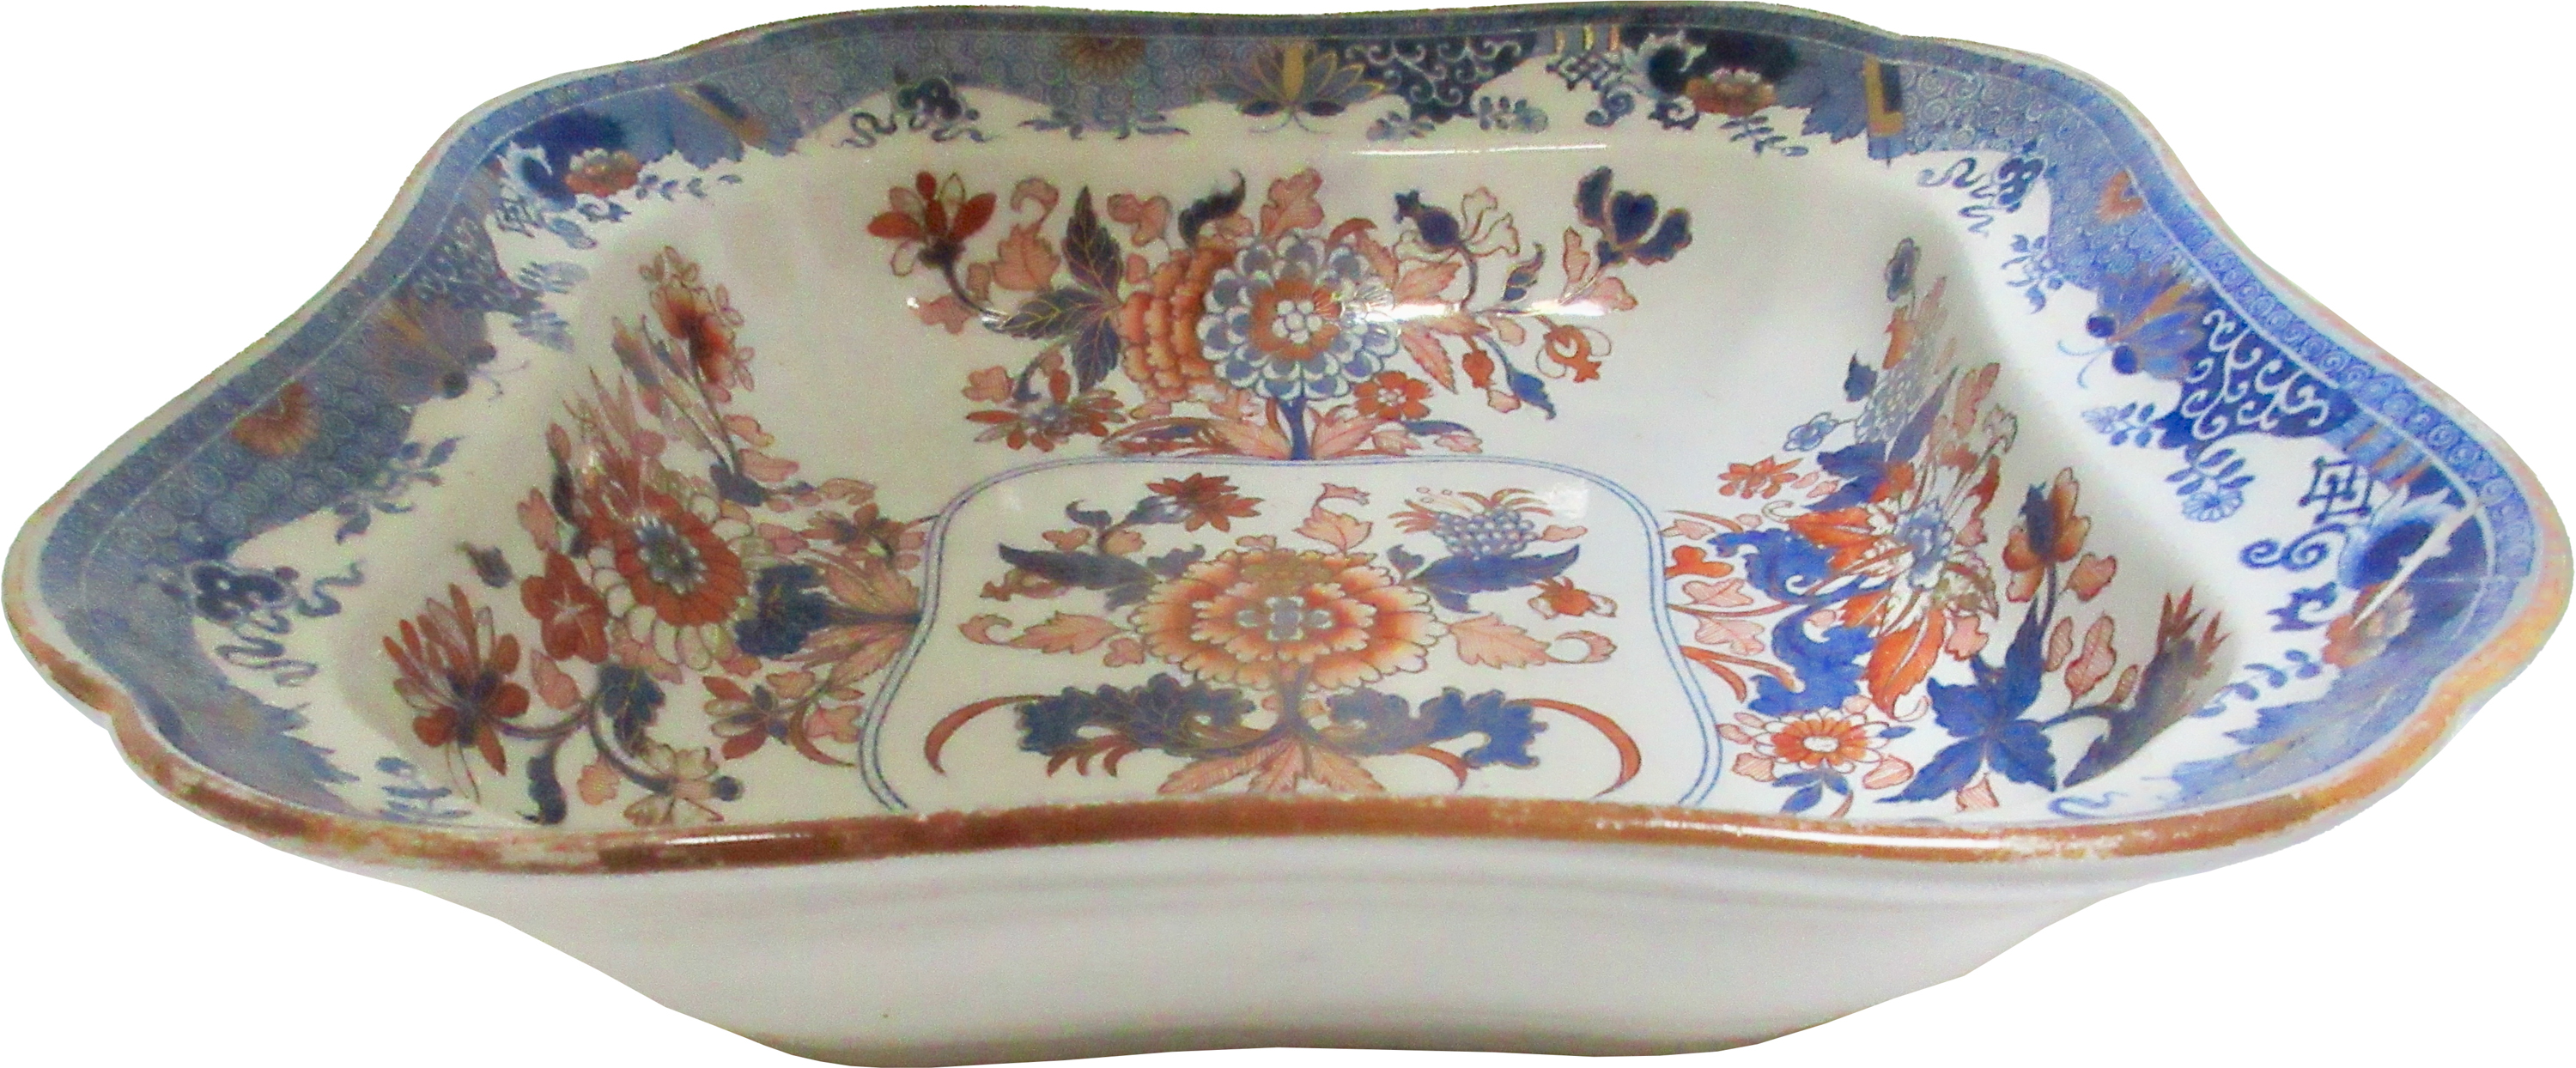 Early 1800s Spode English Serving Bowl~P77595949